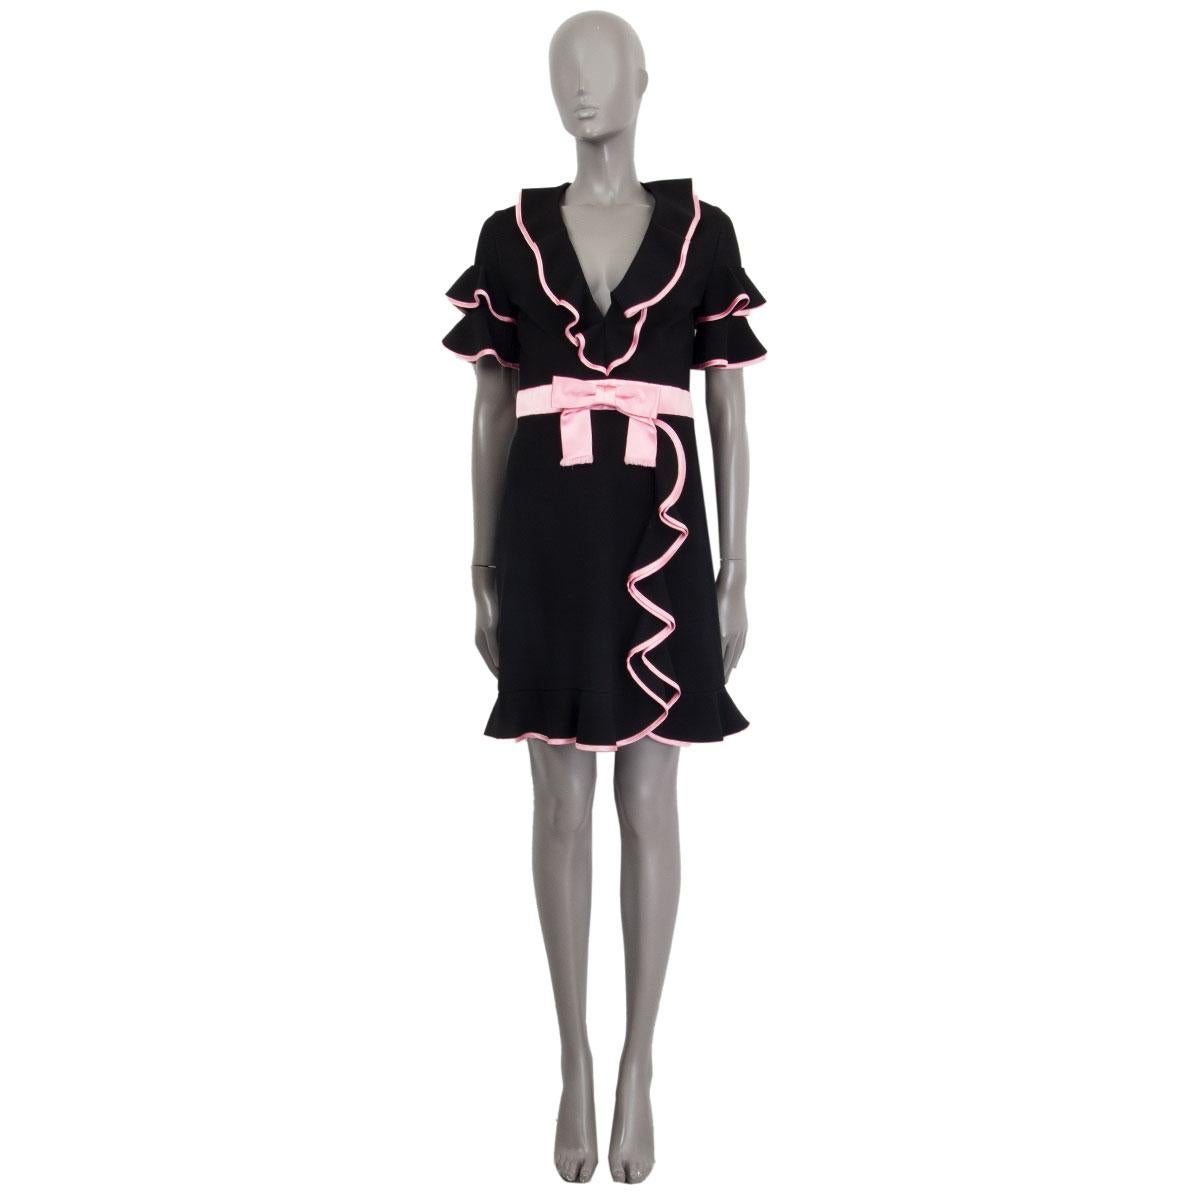 100% authentic Gucci short sleeve bow detail babydoll dress in black and bubblegum pink polyamide (92%) and elastane (8%) with a deep v-neck. Closes on the back with a zipper. Unlined. Has been worn and is in excellent condition. 

Measurements
Tag